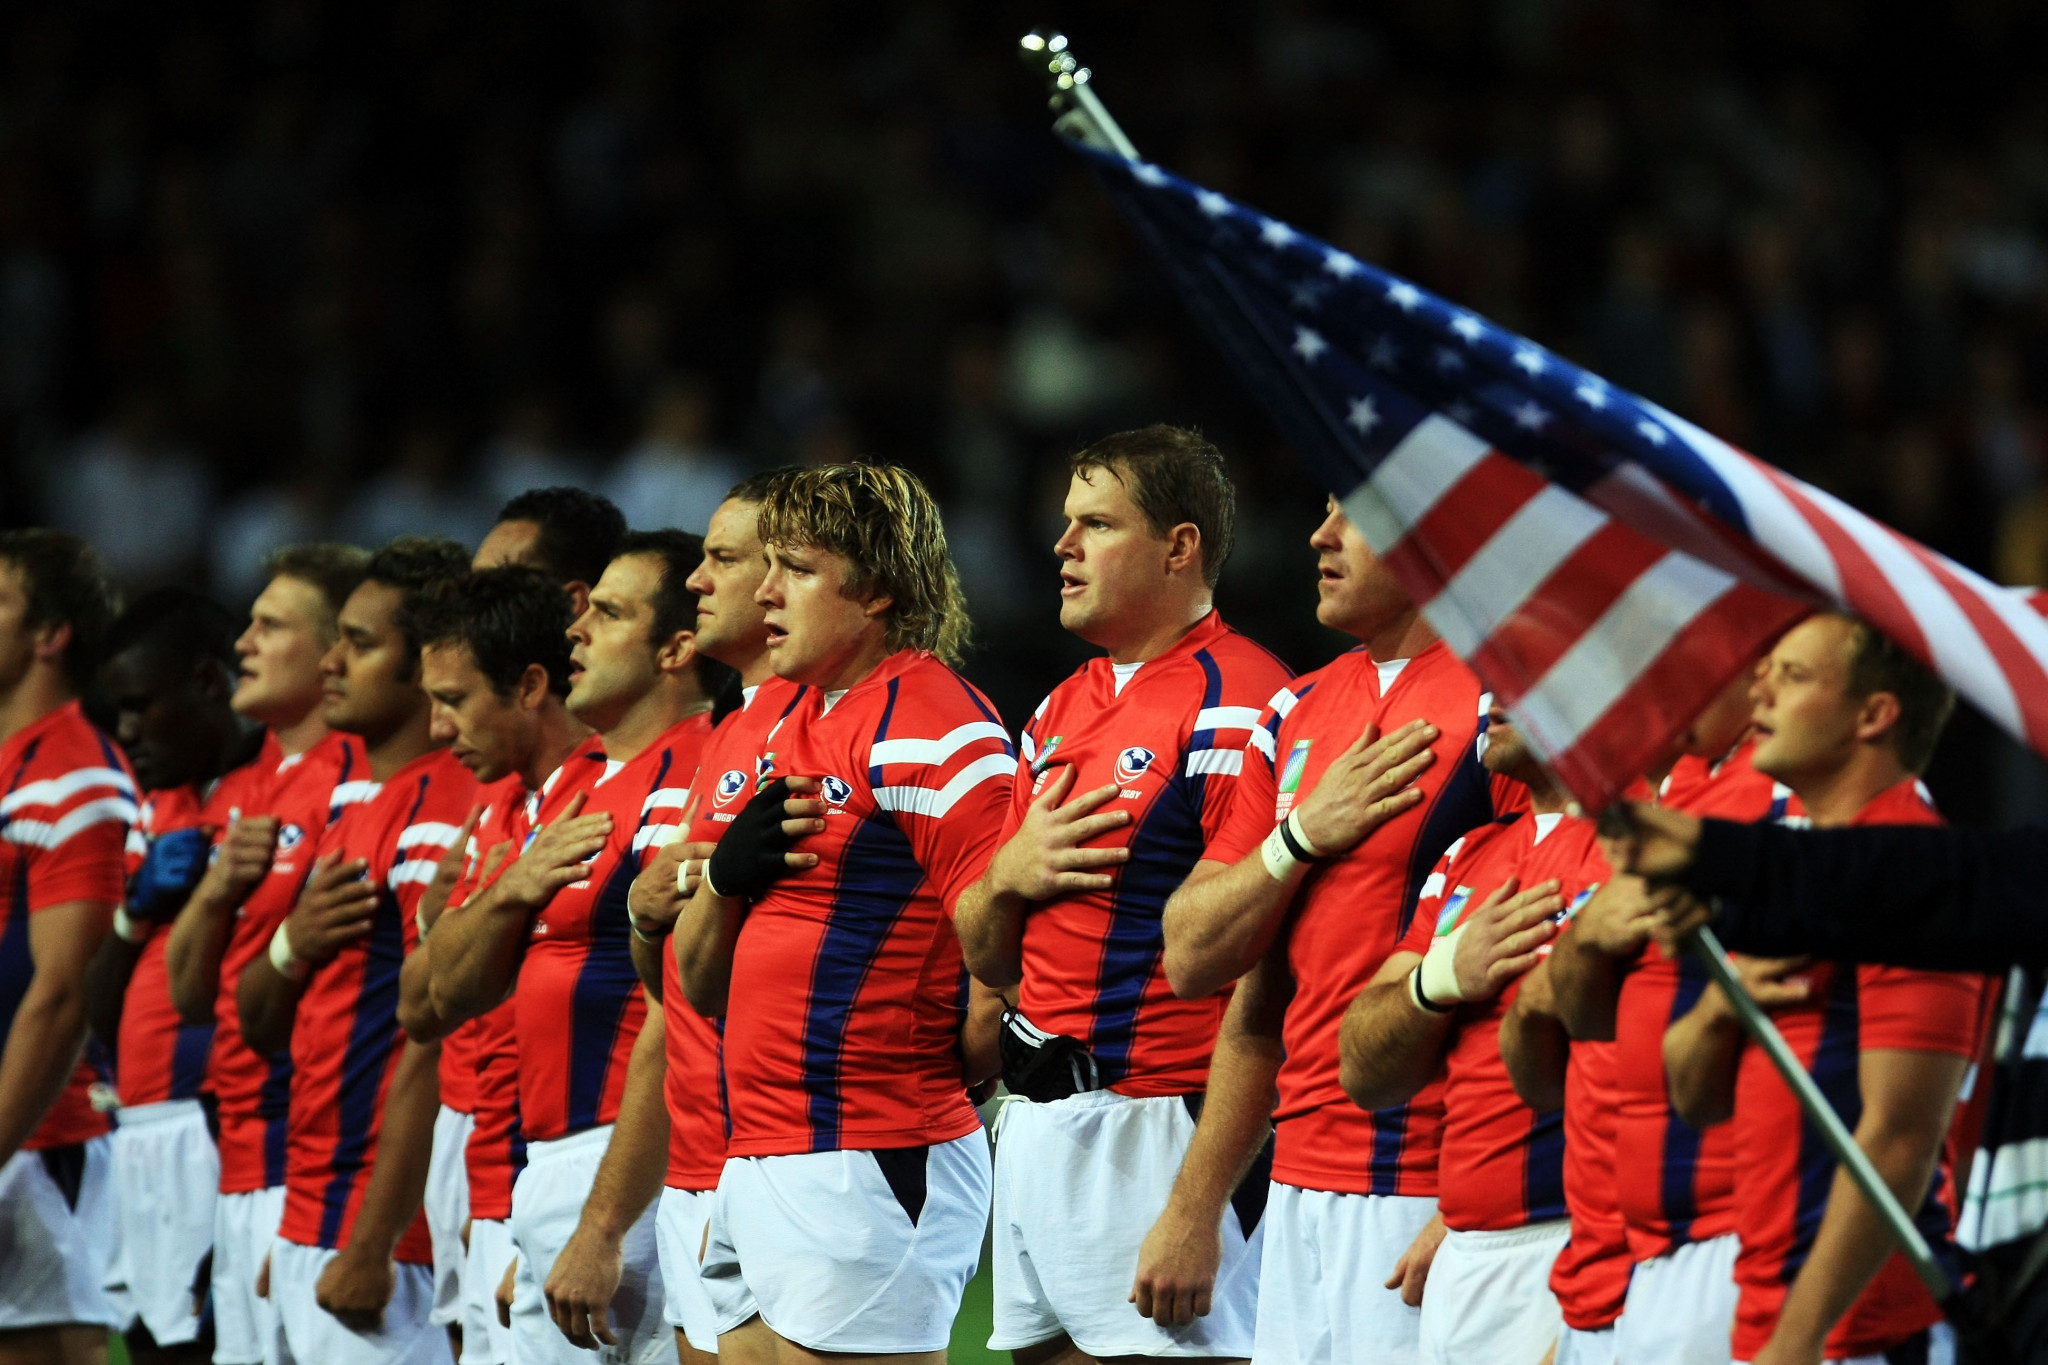 USA Rugby partners with TeachAids to deliver concussion education